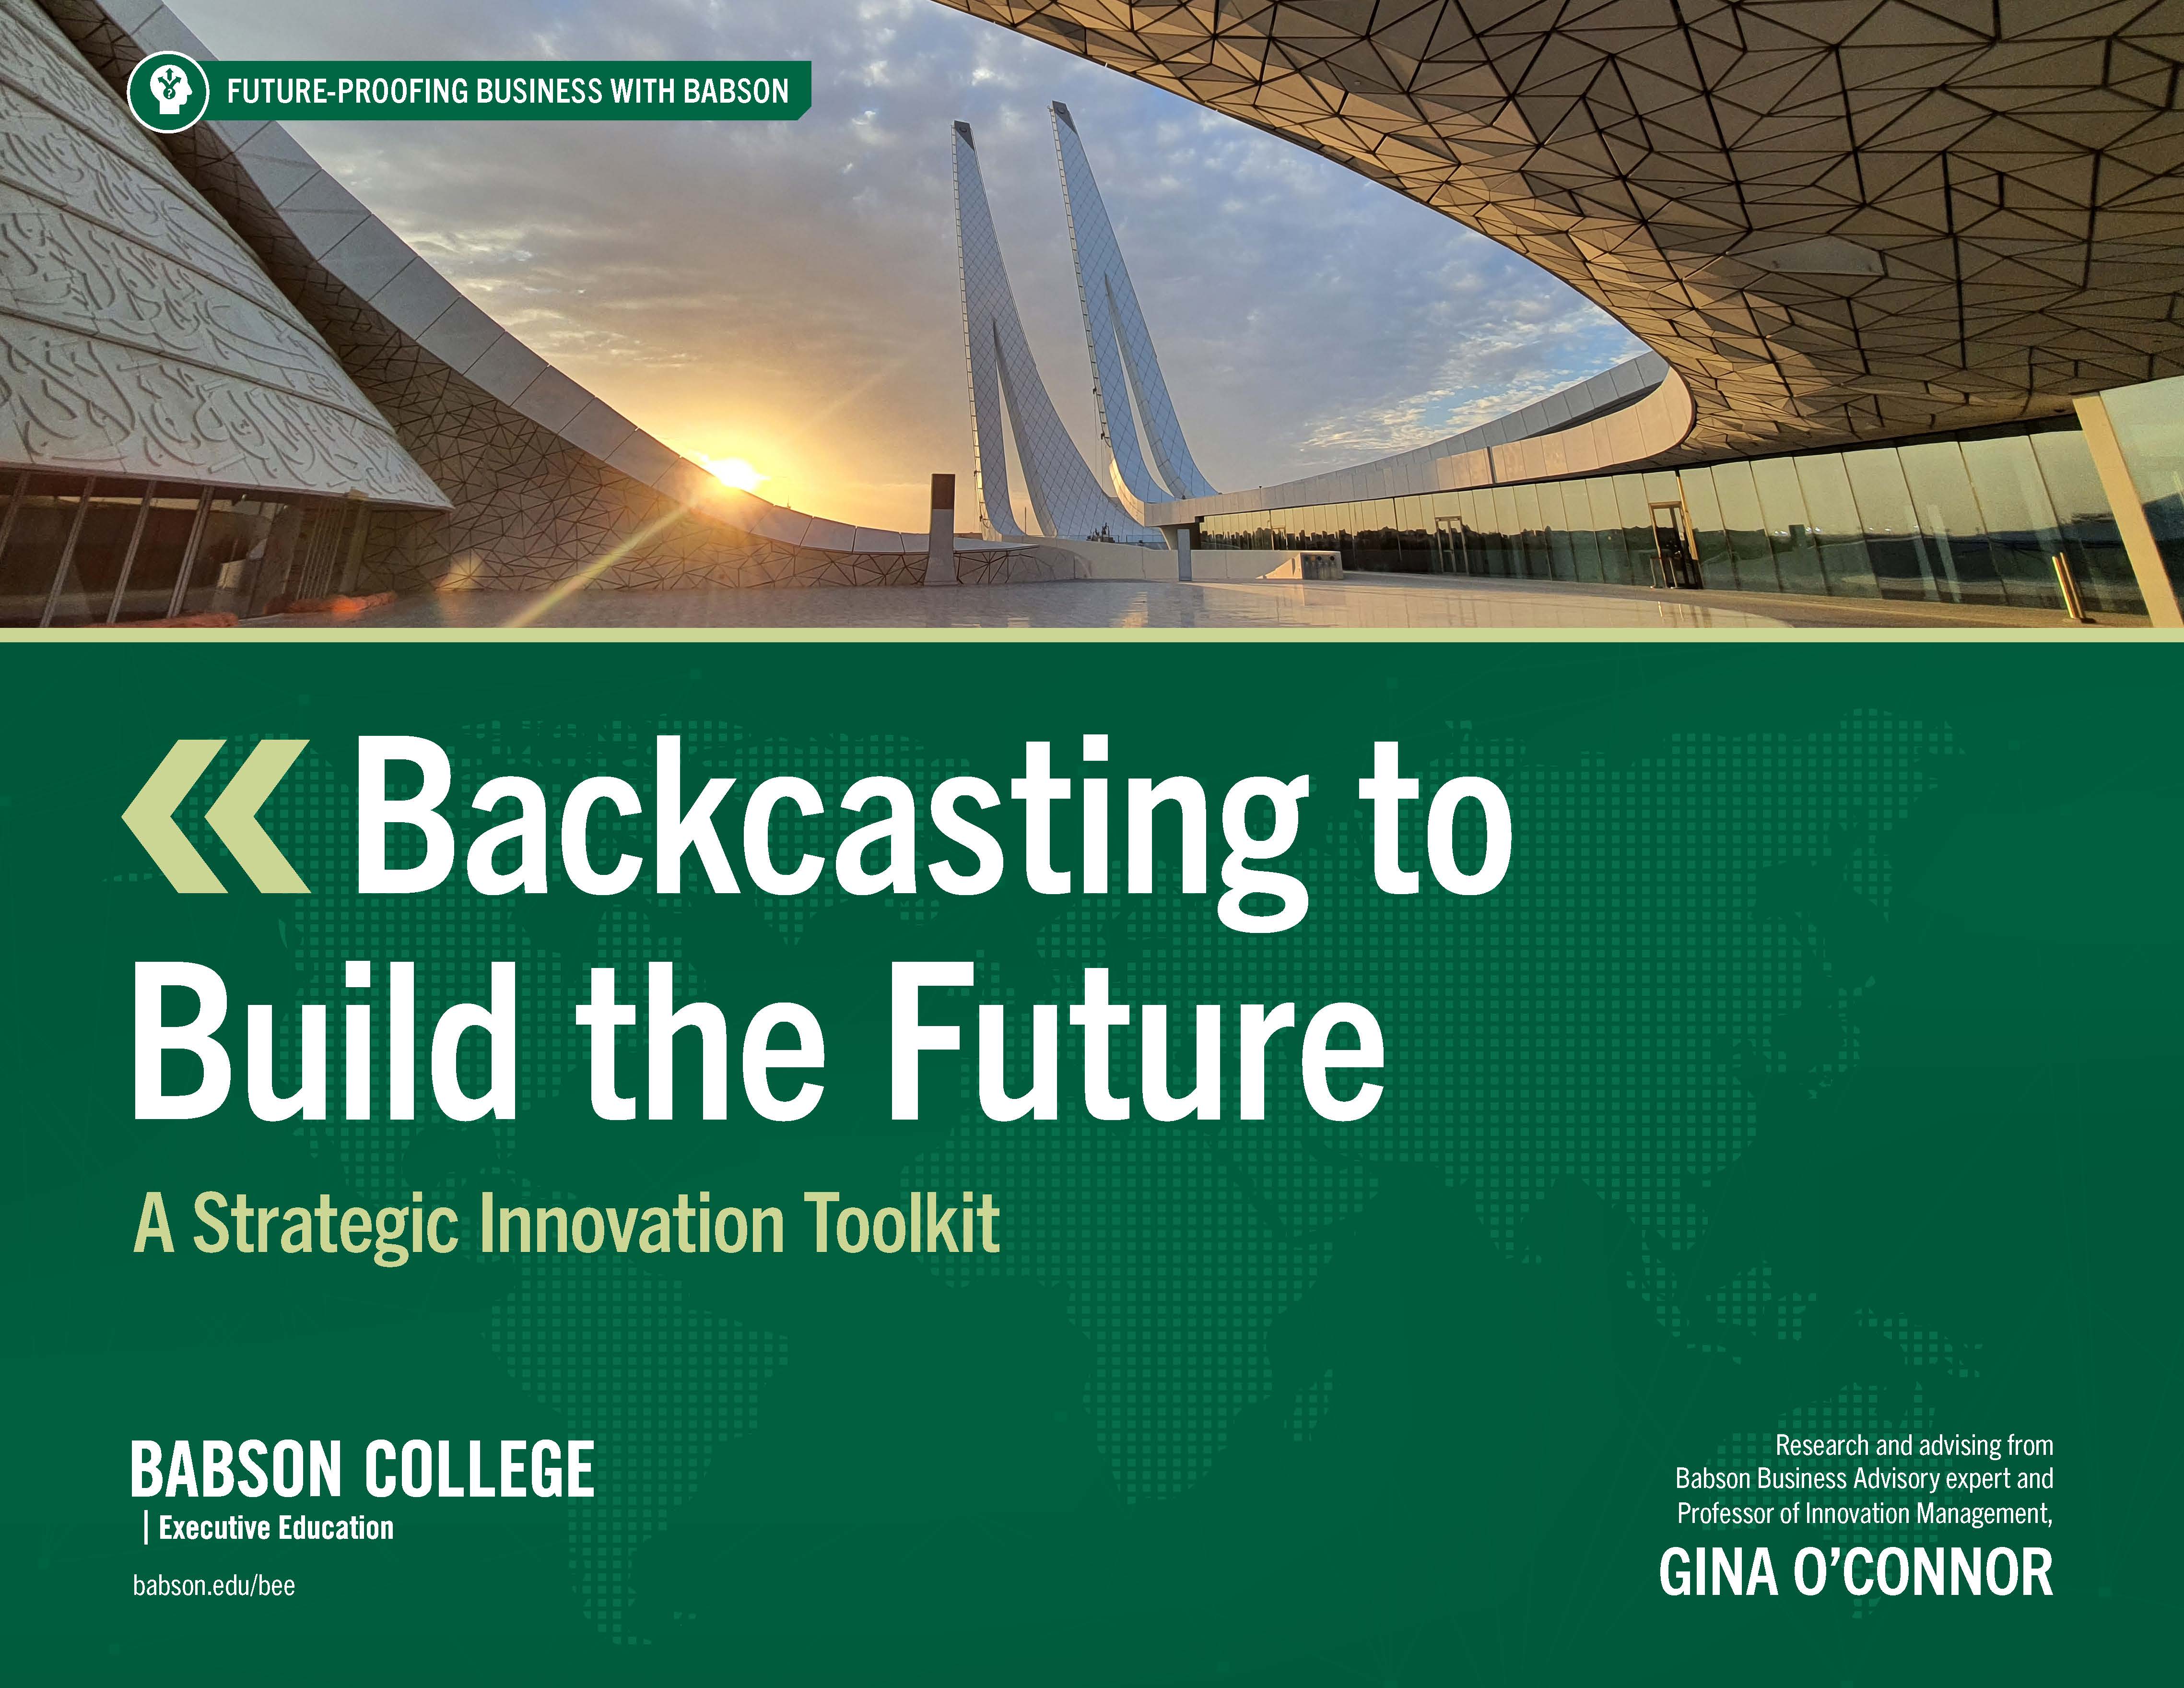 Backcasting to Build the Future